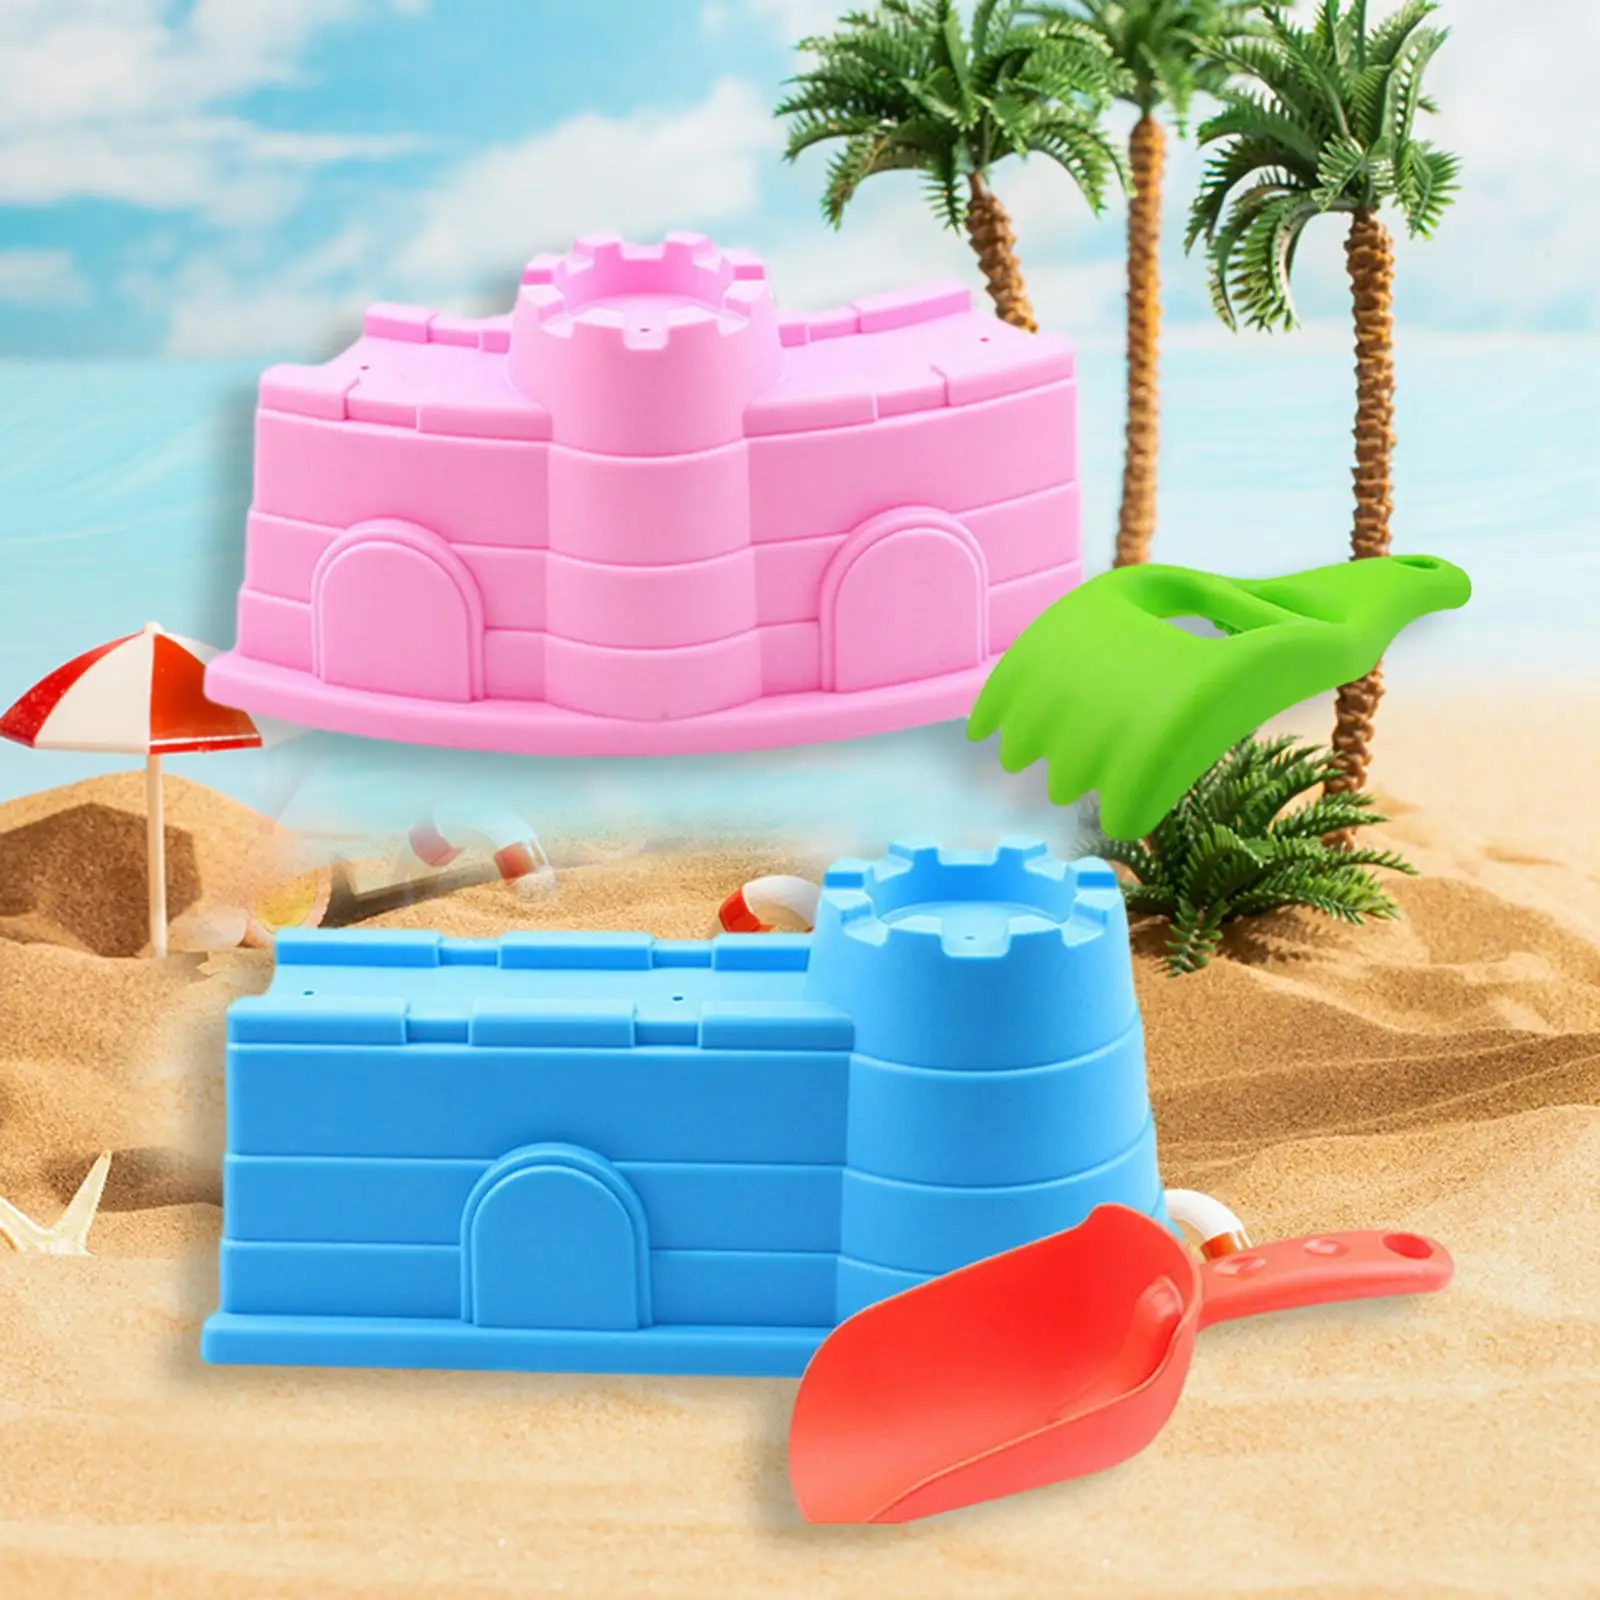 Castle Building for Kids Sandbox Play Sand Castle Toys for Beach Winter Snow Toys for Toddlers Boys Girls Outdoor Activities